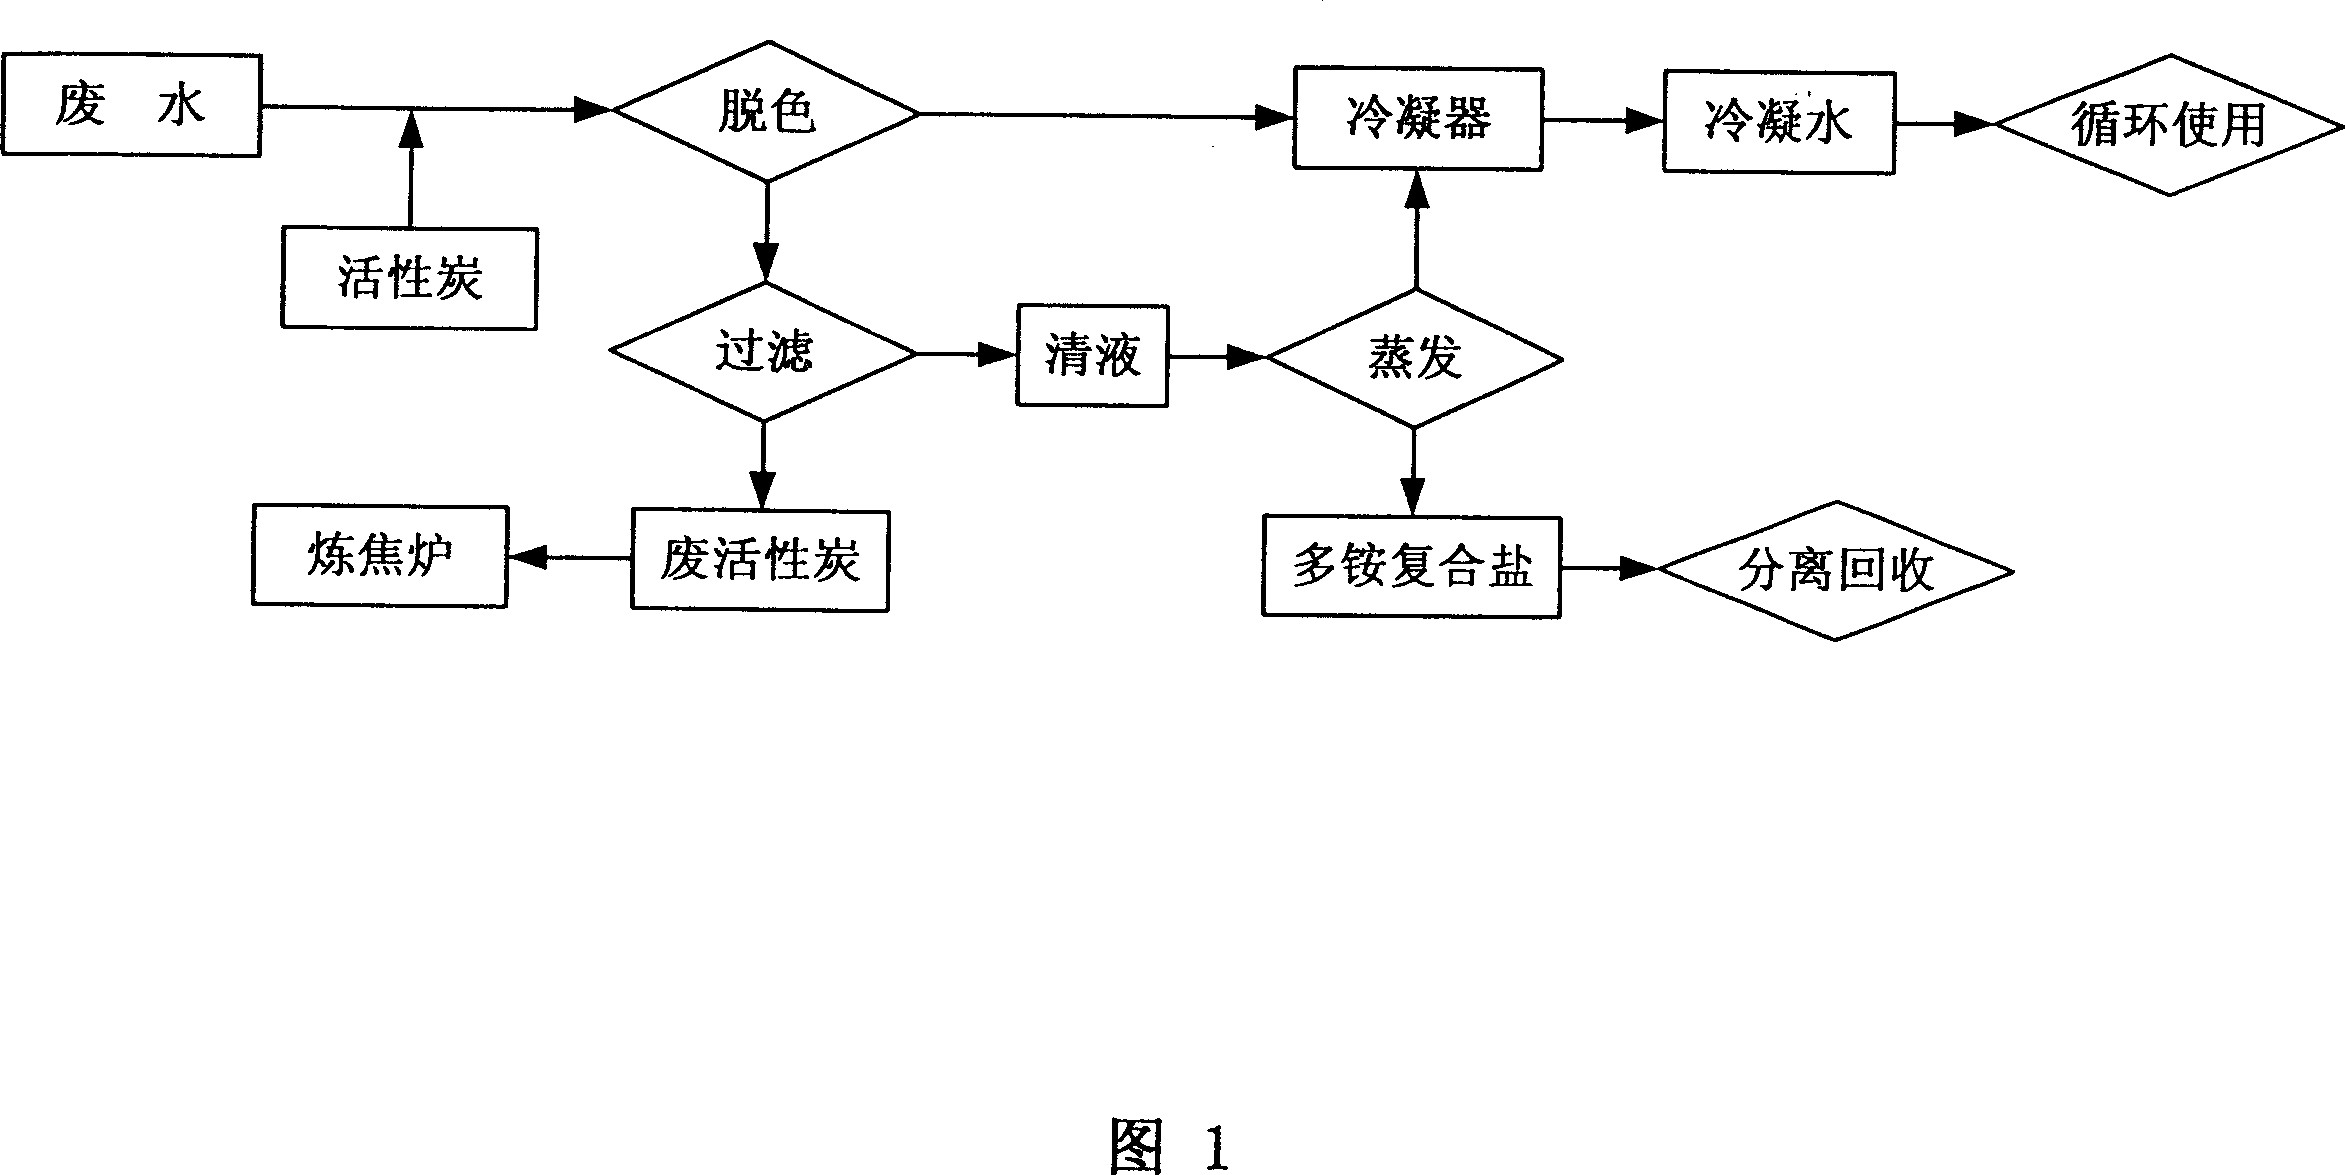 Treatment processes of coke oven gas desulfurization and decyanation waste water